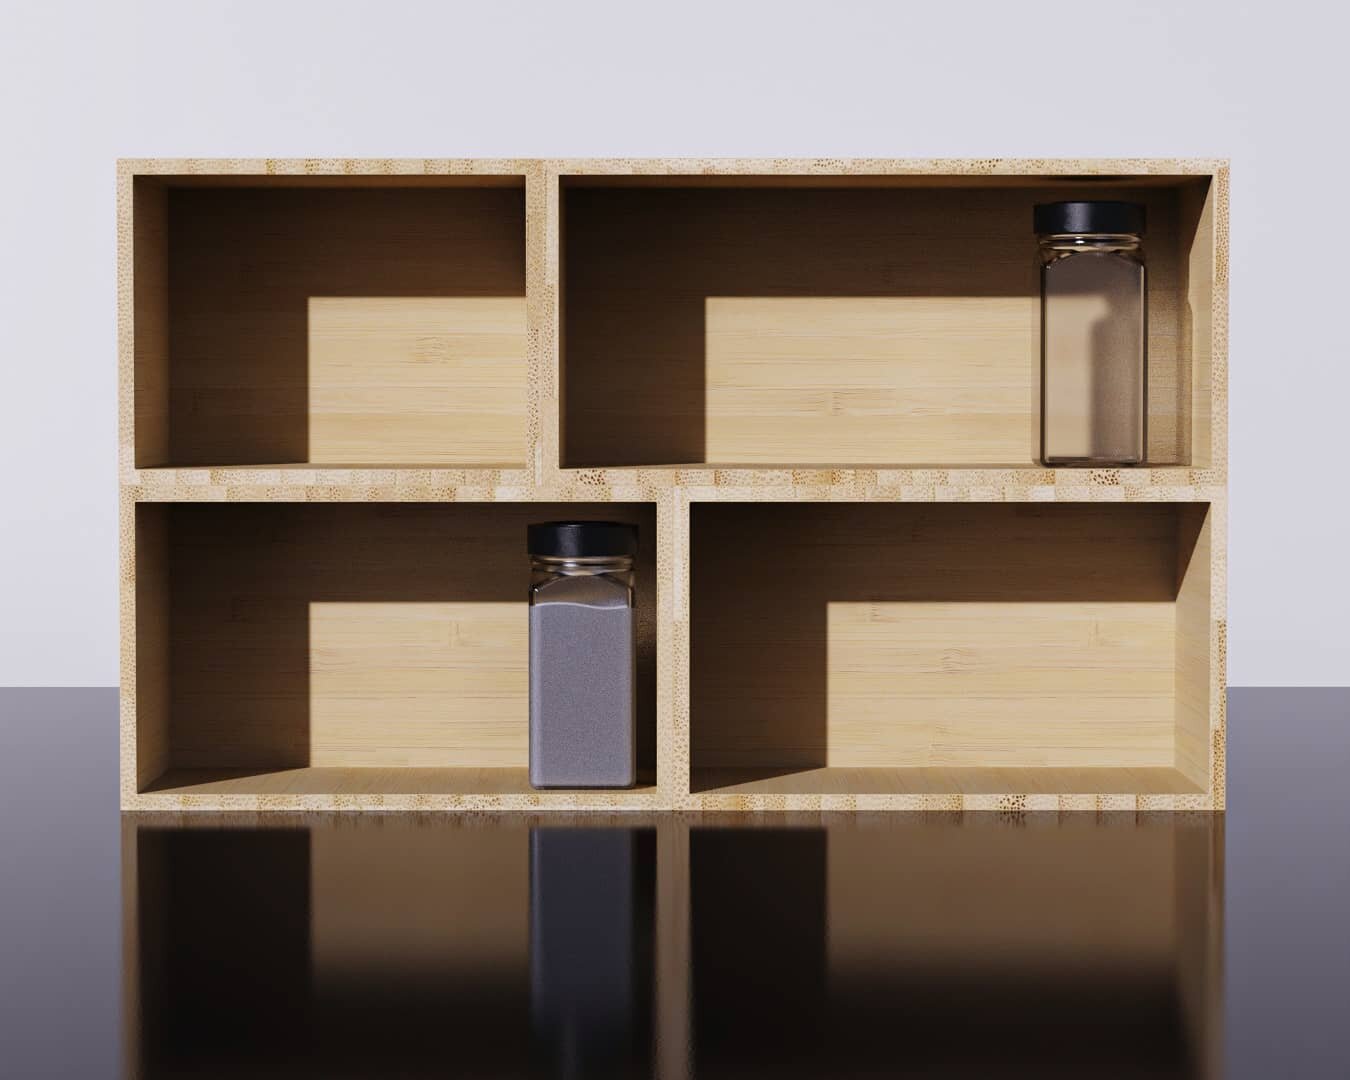 Modular bamboo spice storage that allows the user to easily categorize spices and organize them to fit their space. Going for simple vibes so it acts like a blank canvas for the individual's unique collection. Short project for one of my classes!